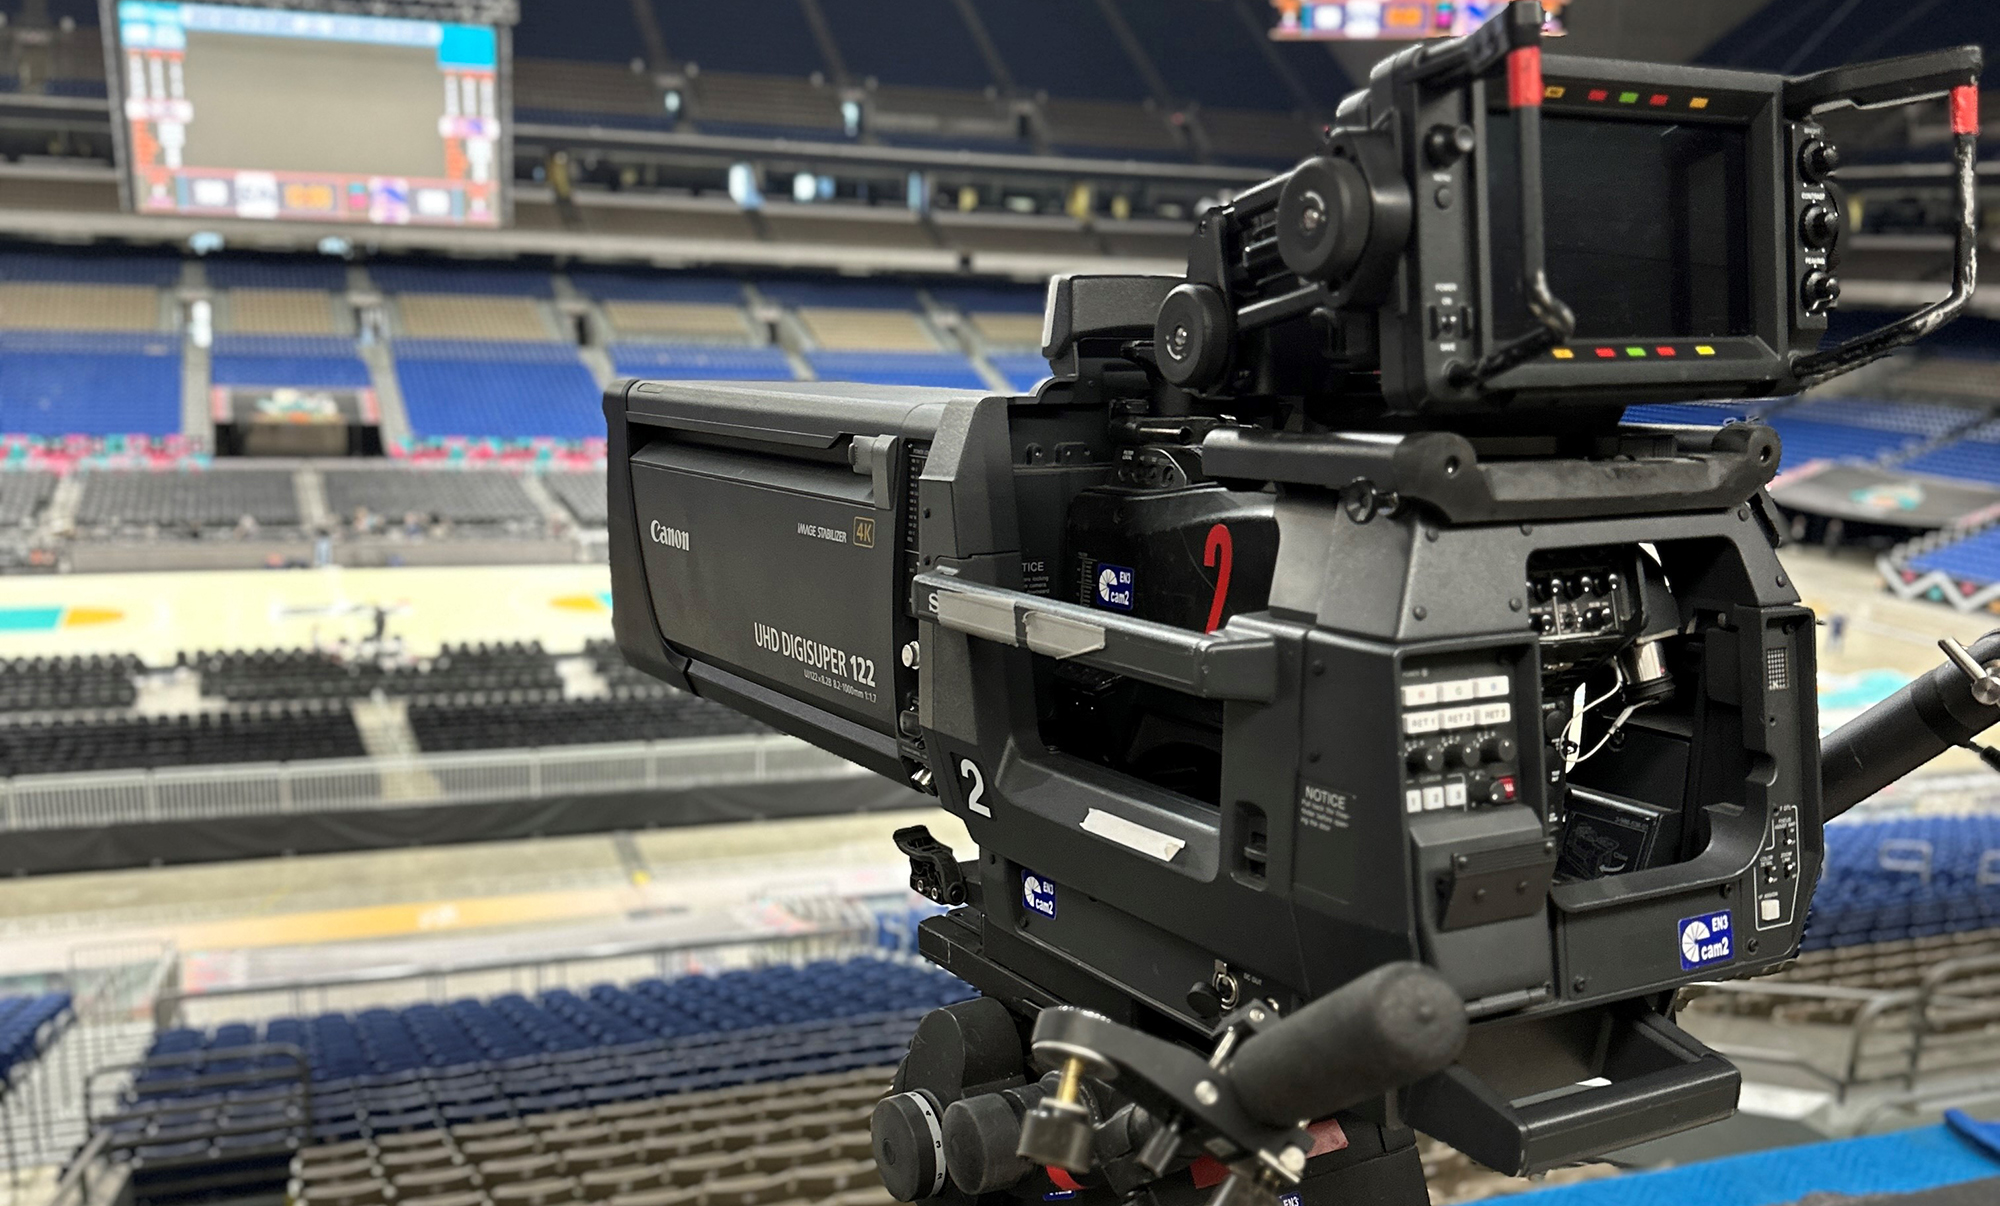 ESPN Rolls Out Skycam, Sony a1 Mirrorless Camera, and More To Capture Historic Spurs-Warriors Game at Alamodome